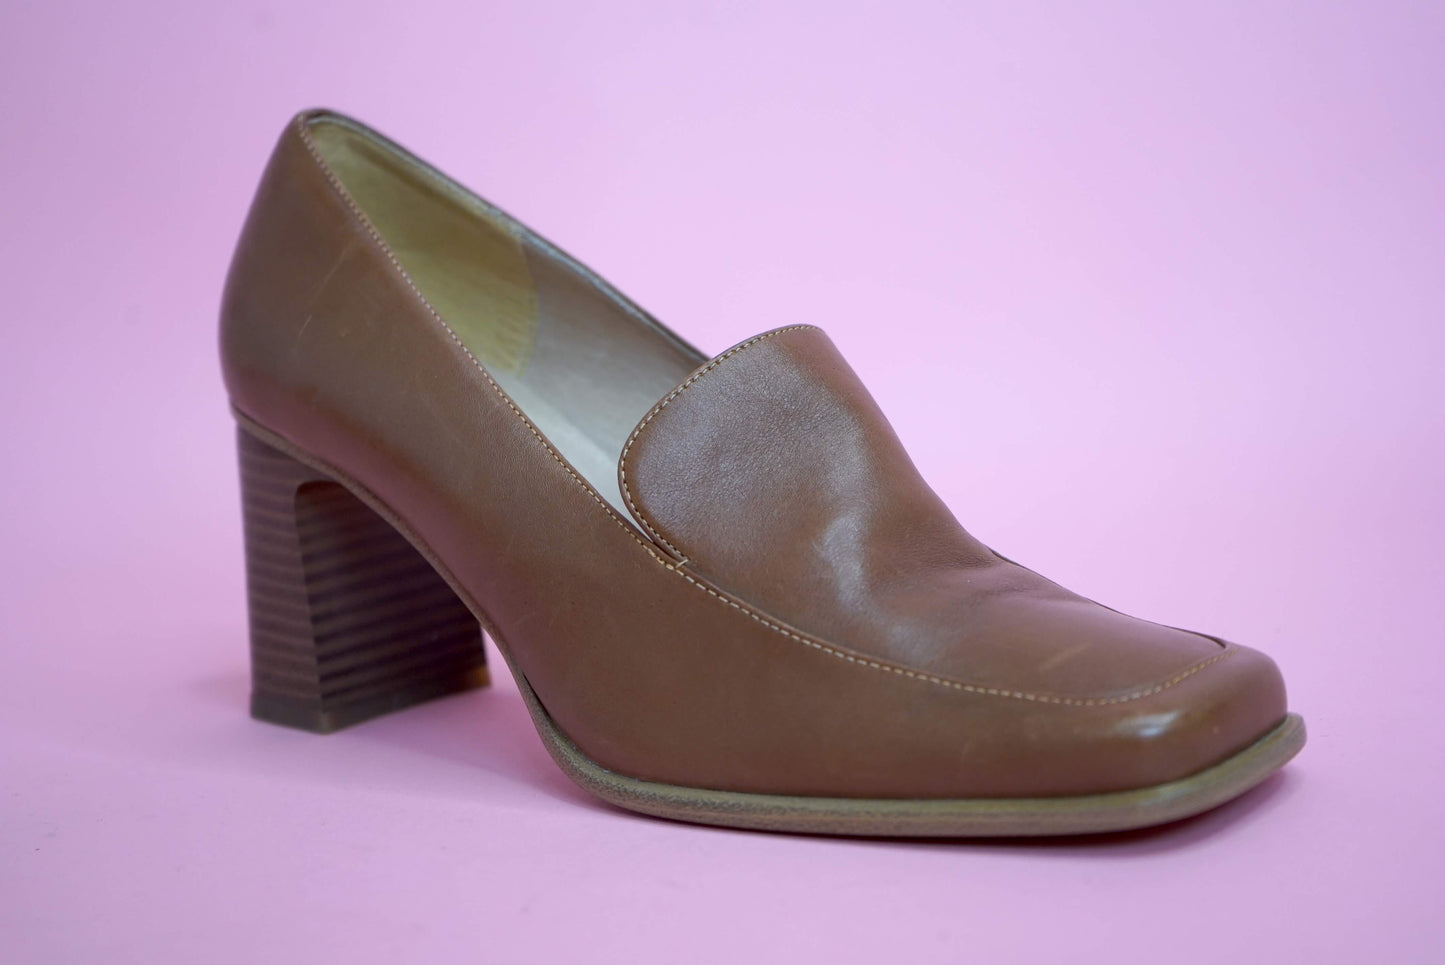 90s Vintage Brown Square Toe Leather Penny Court Shoes Size 4/37